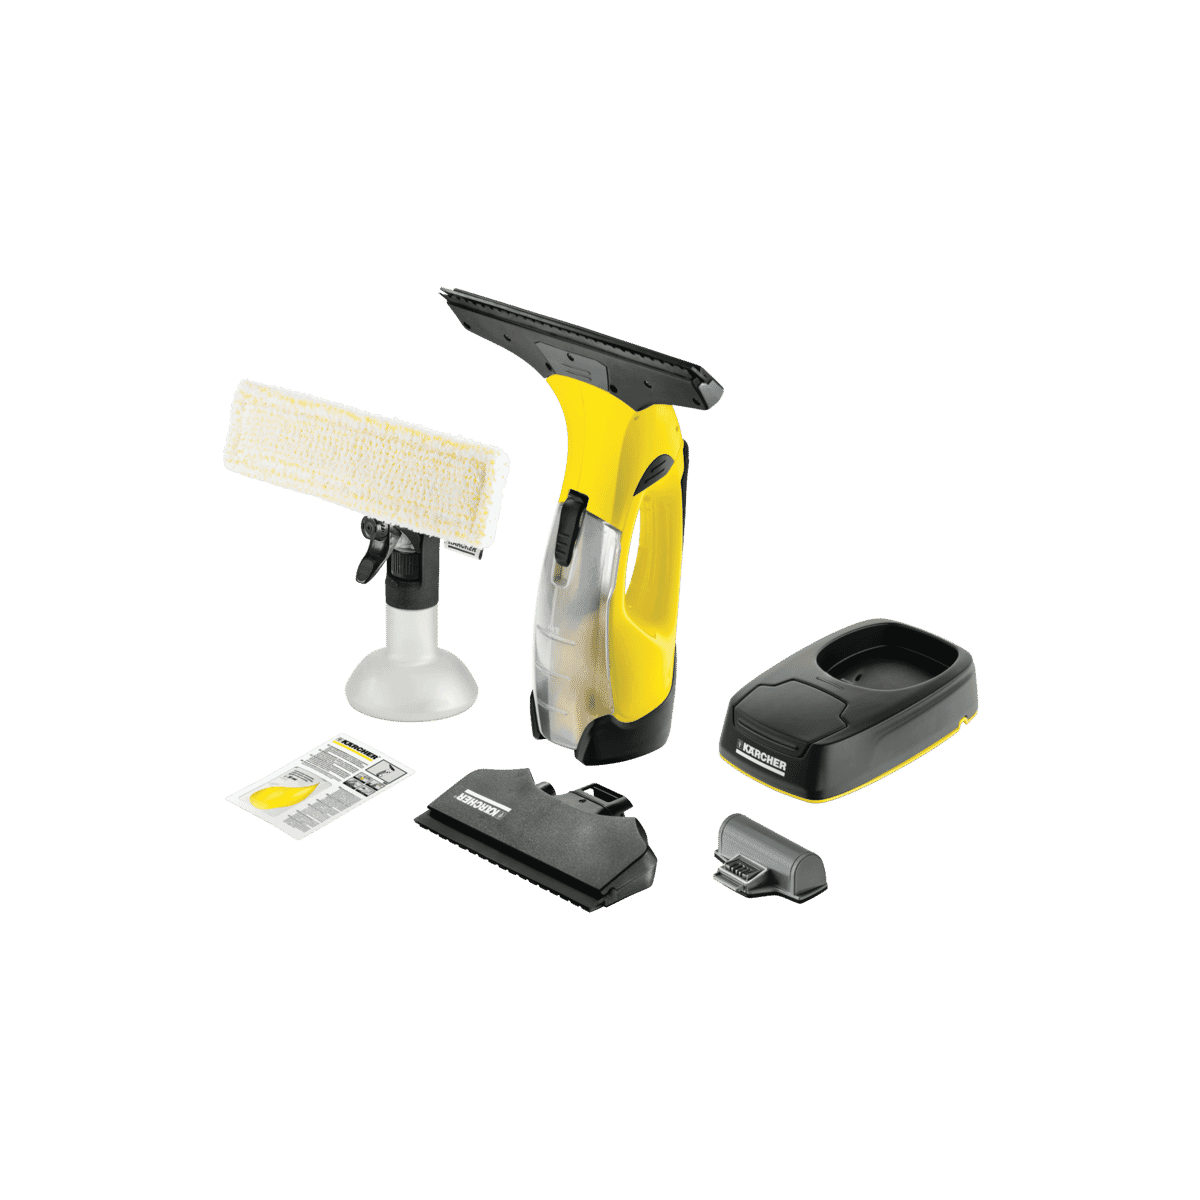 Karcher 1.633-448.0 Non Stop Cleaning Kit WV5 for Window Vac at The Good Guys